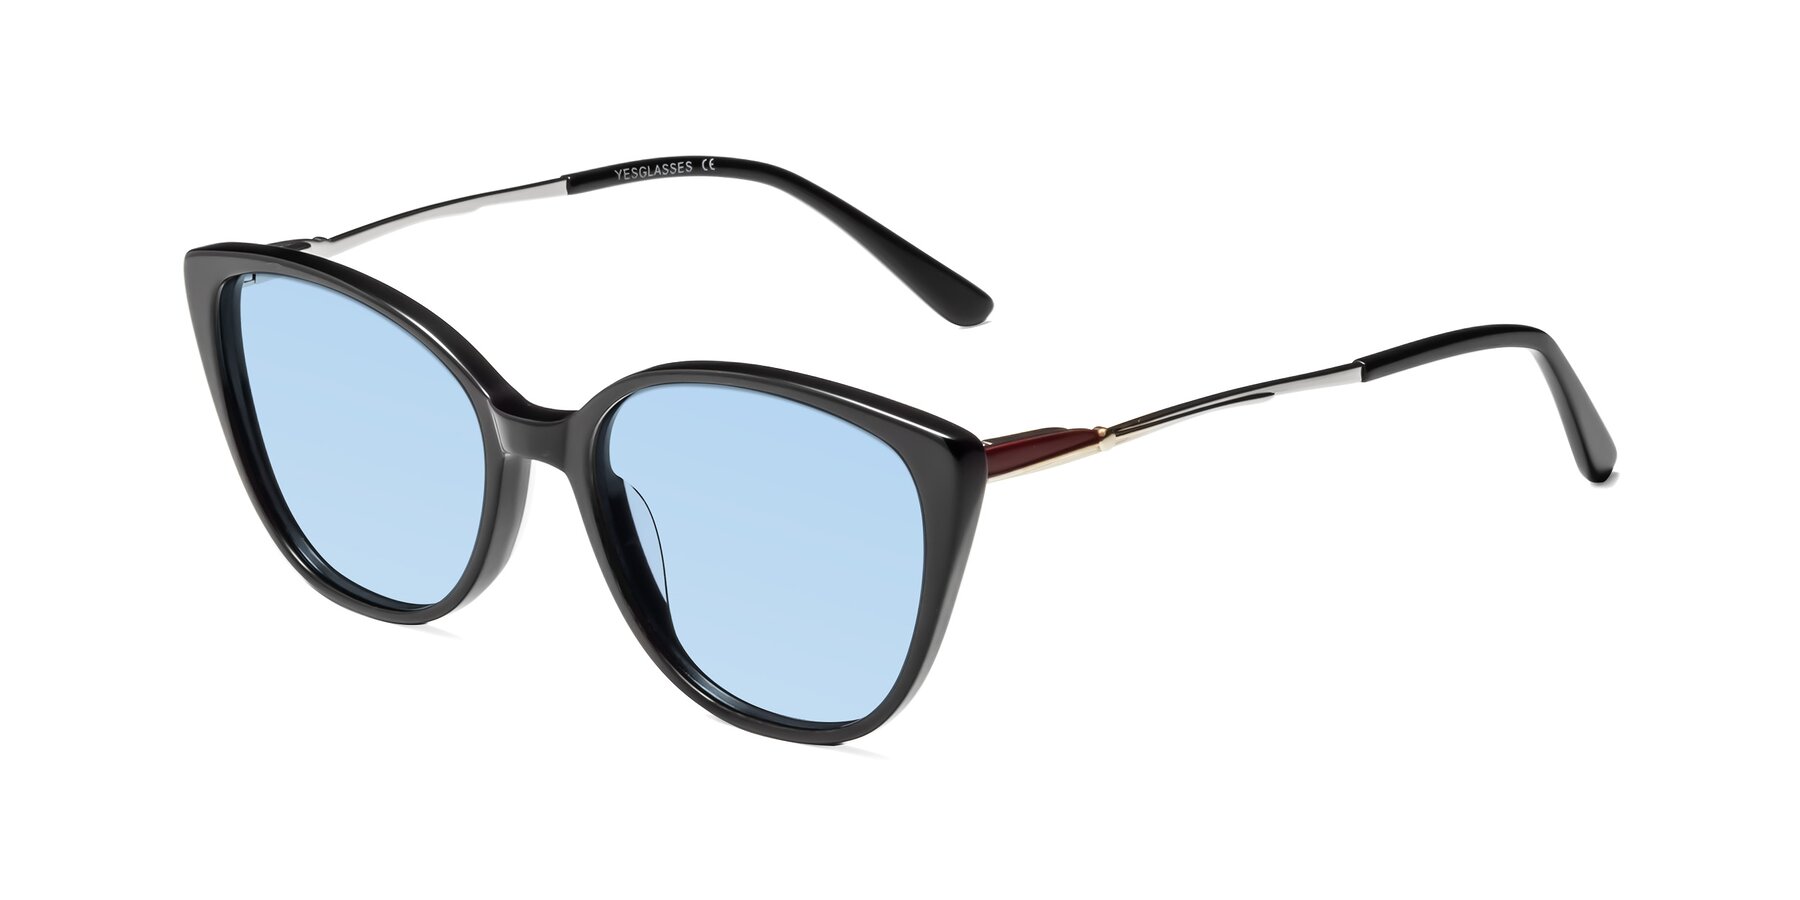 Angle of 17424 in Black with Light Blue Tinted Lenses